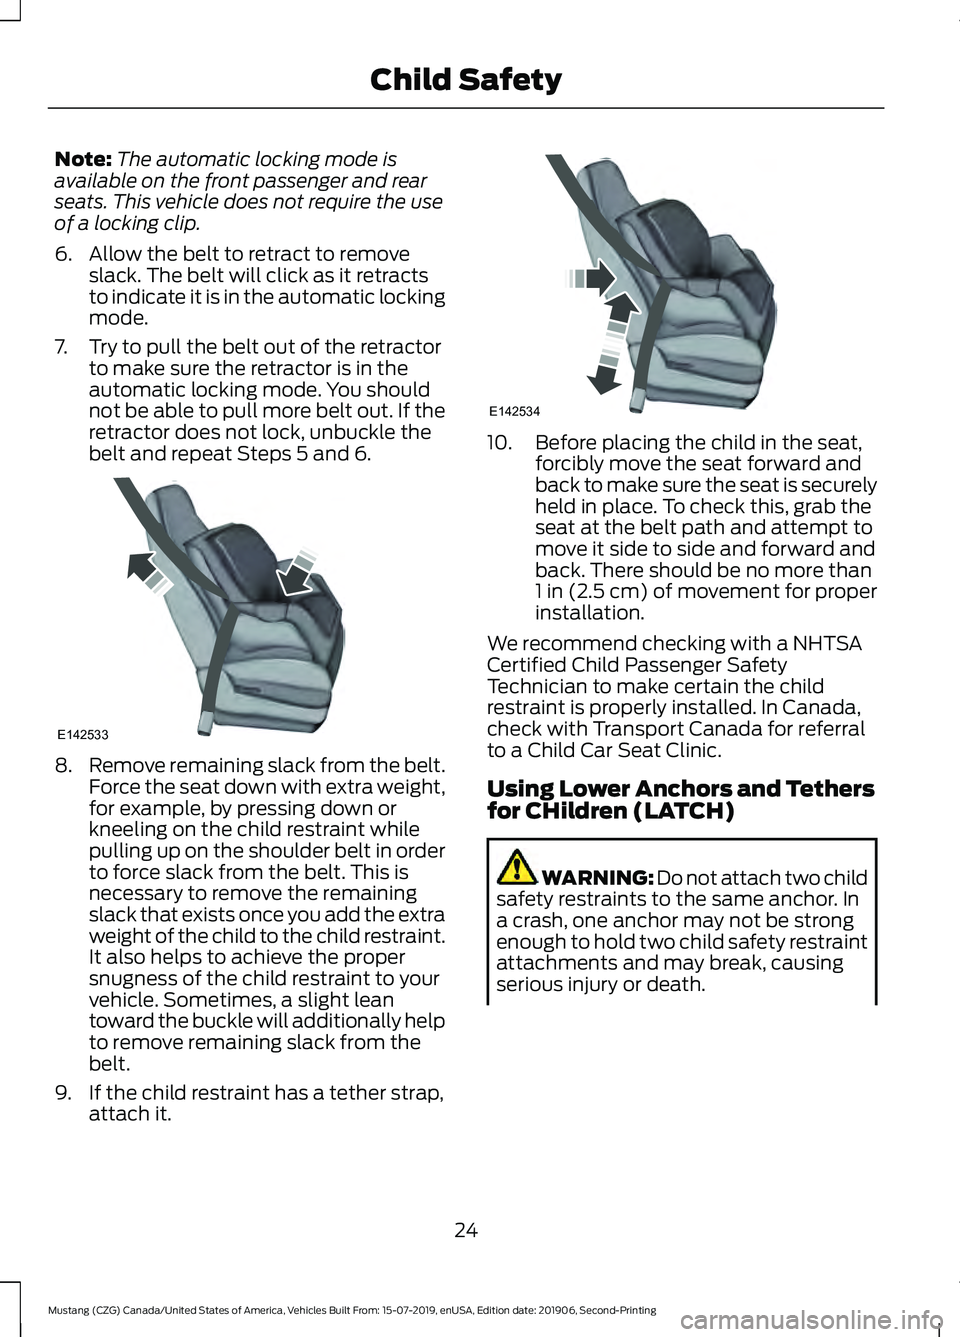 FORD MUSTANG 2020 Owners Manual Note:
The automatic locking mode is
available on the front passenger and rear
seats. This vehicle does not require the use
of a locking clip.
6. Allow the belt to retract to remove slack. The belt wil